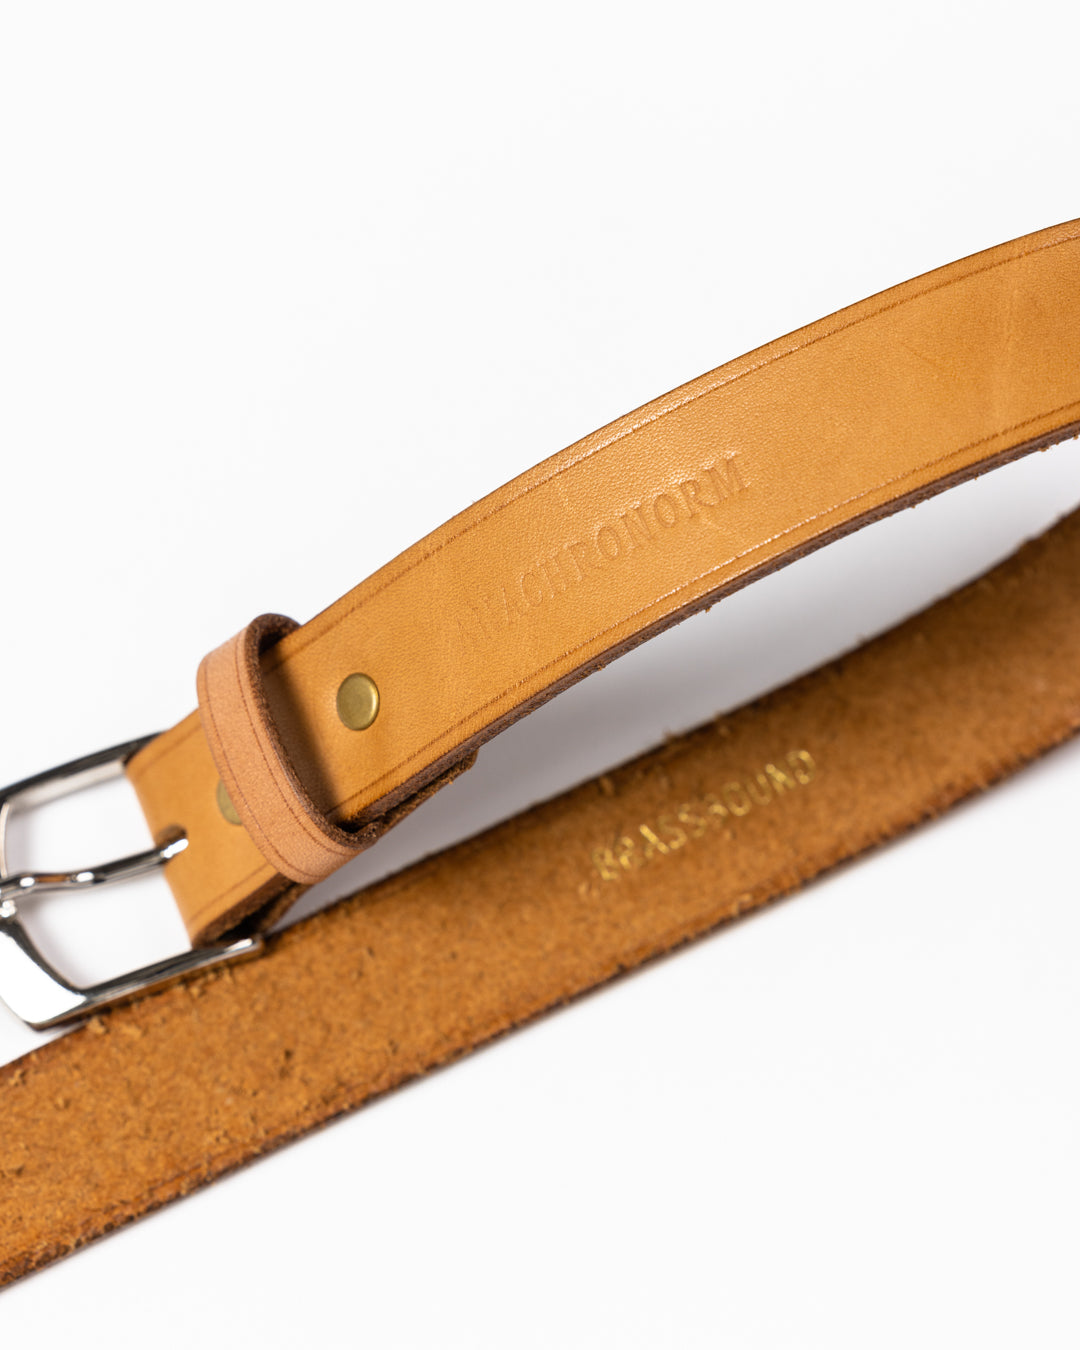 ANBB039 PINBUCKLE RING LEATHER BELT NATURAL – ANACHRONORM